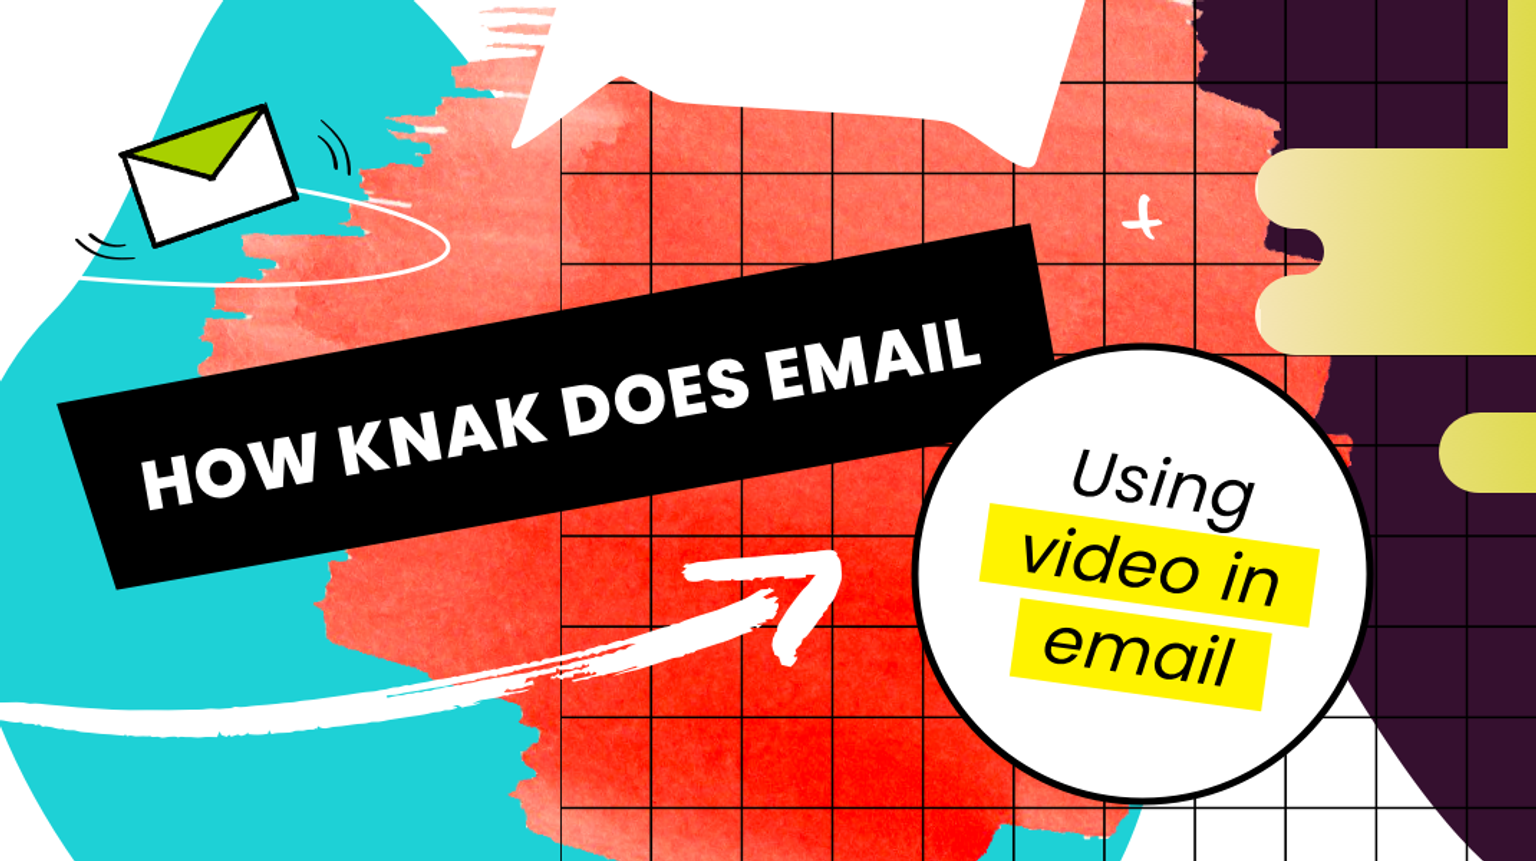 Using Video in Email